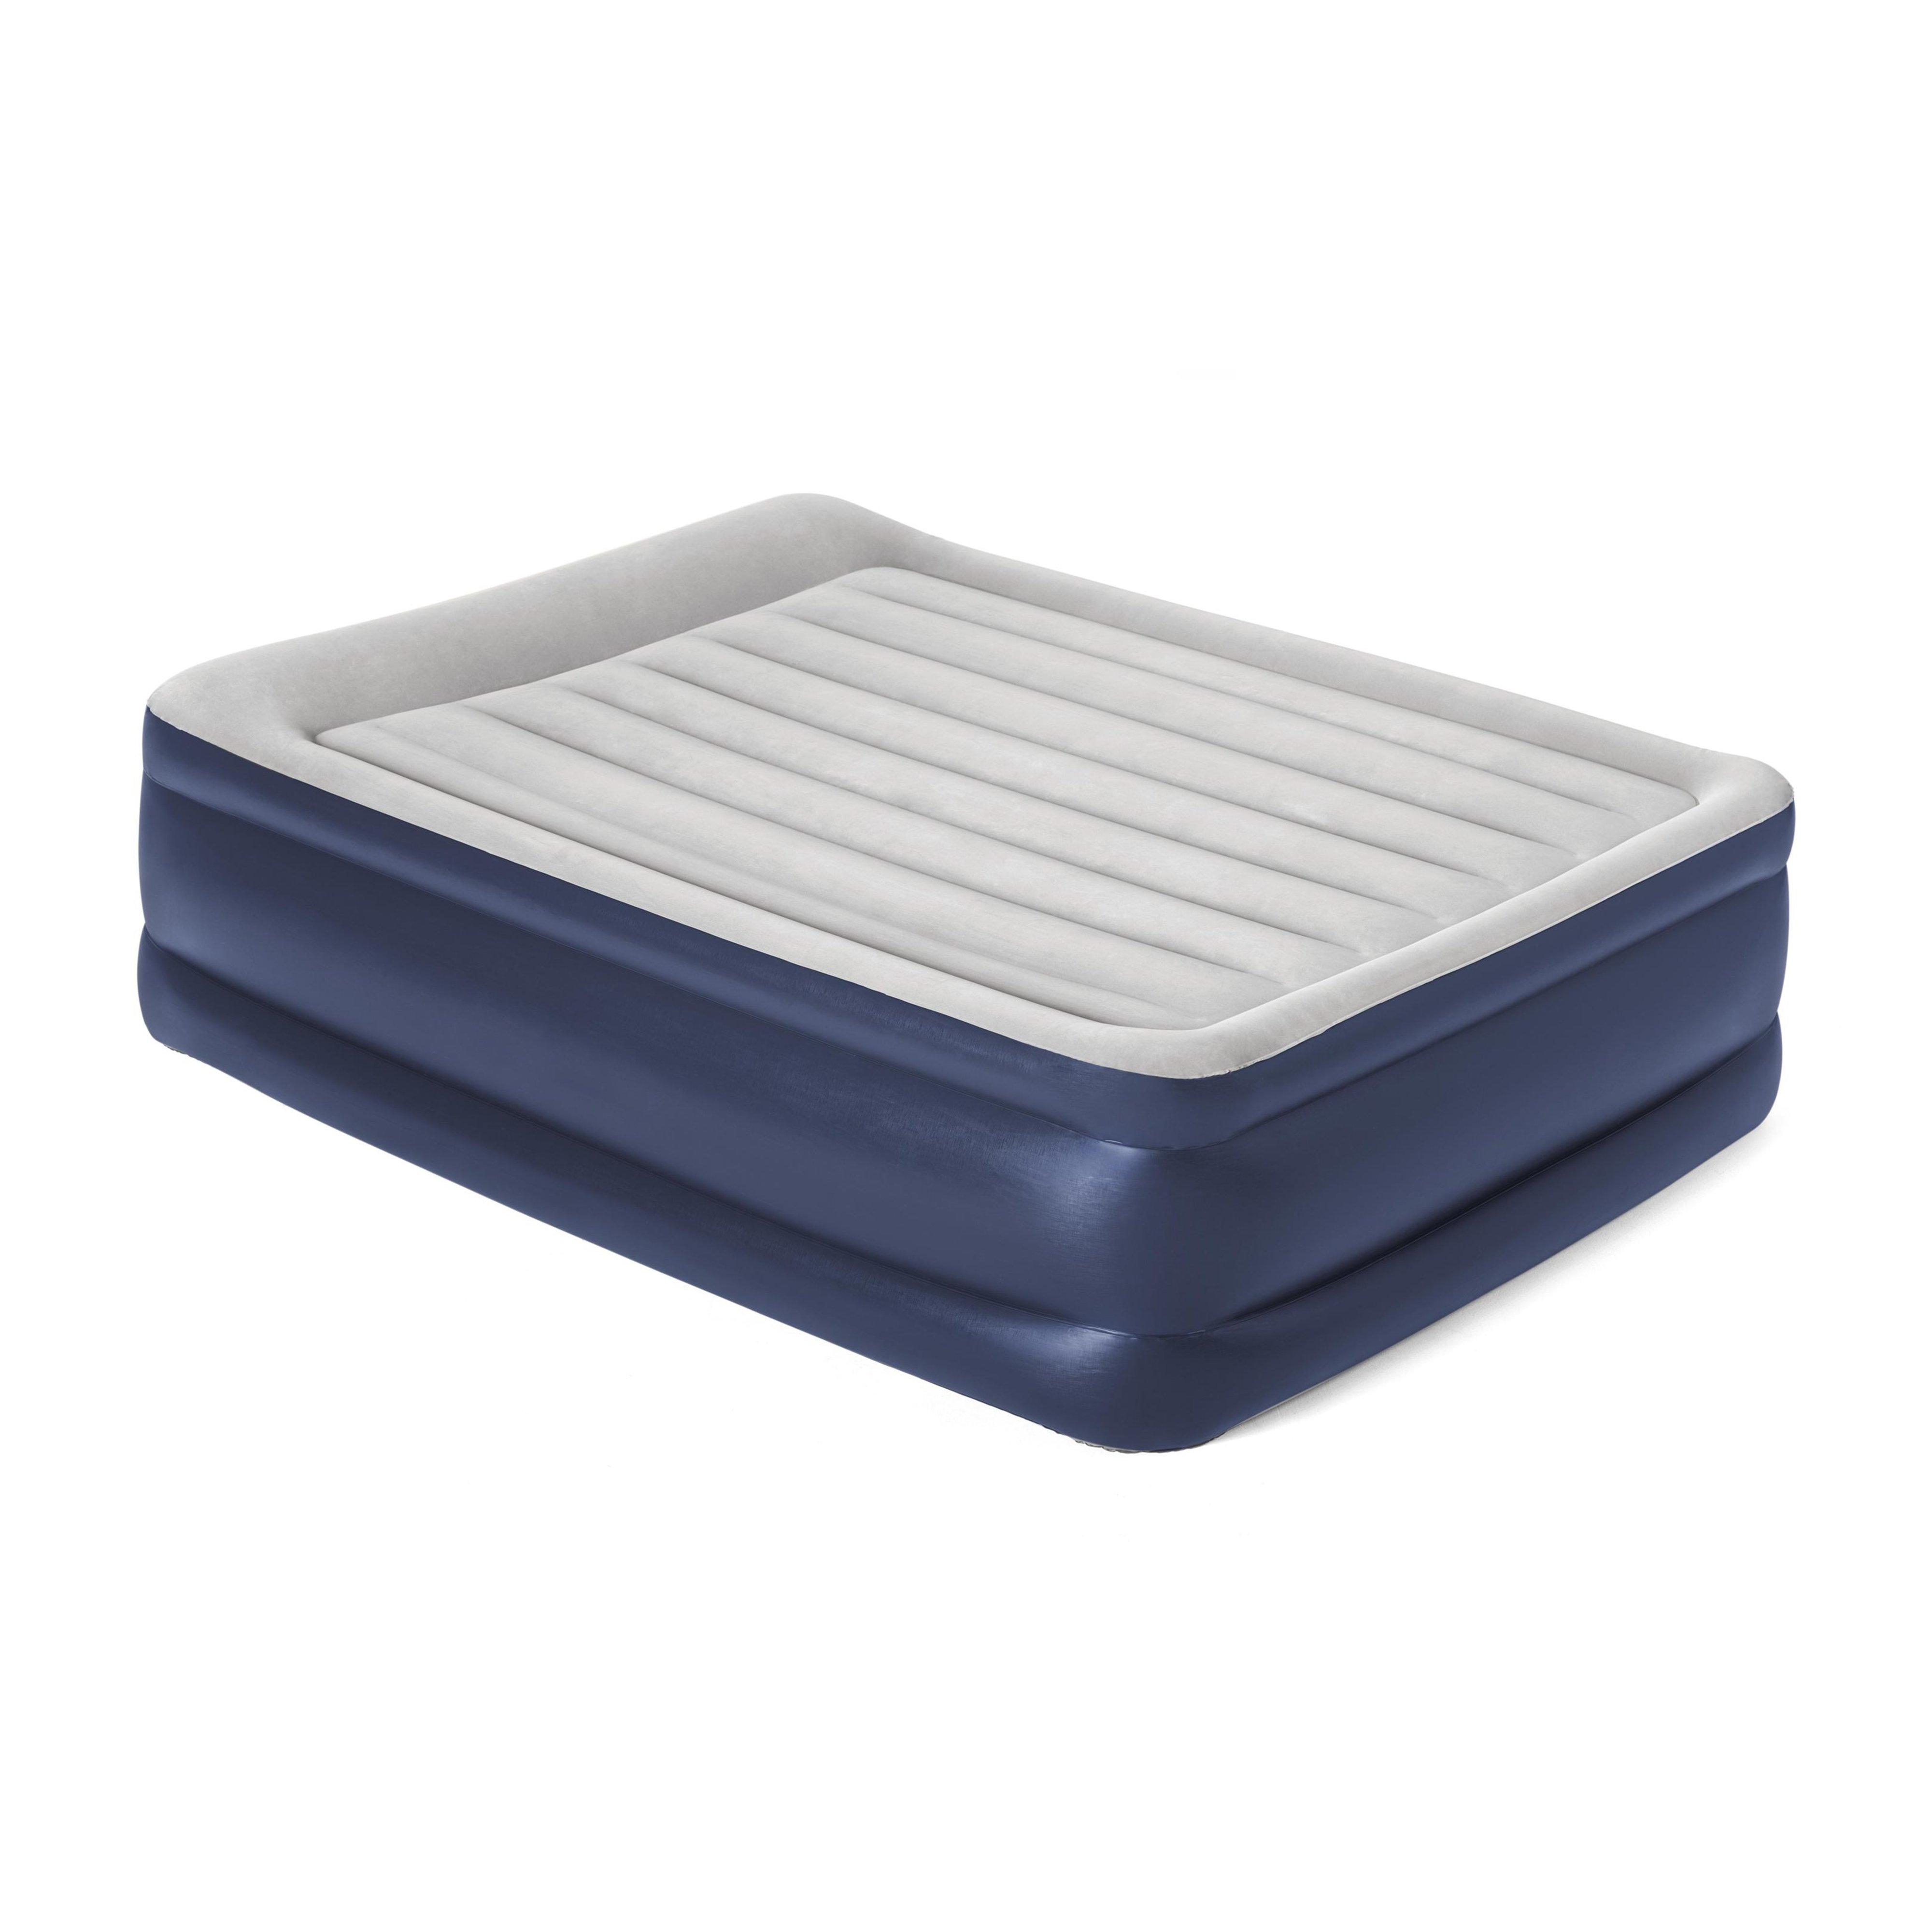  HI-GEAR High Rise Flock King Size Airbed, Blue